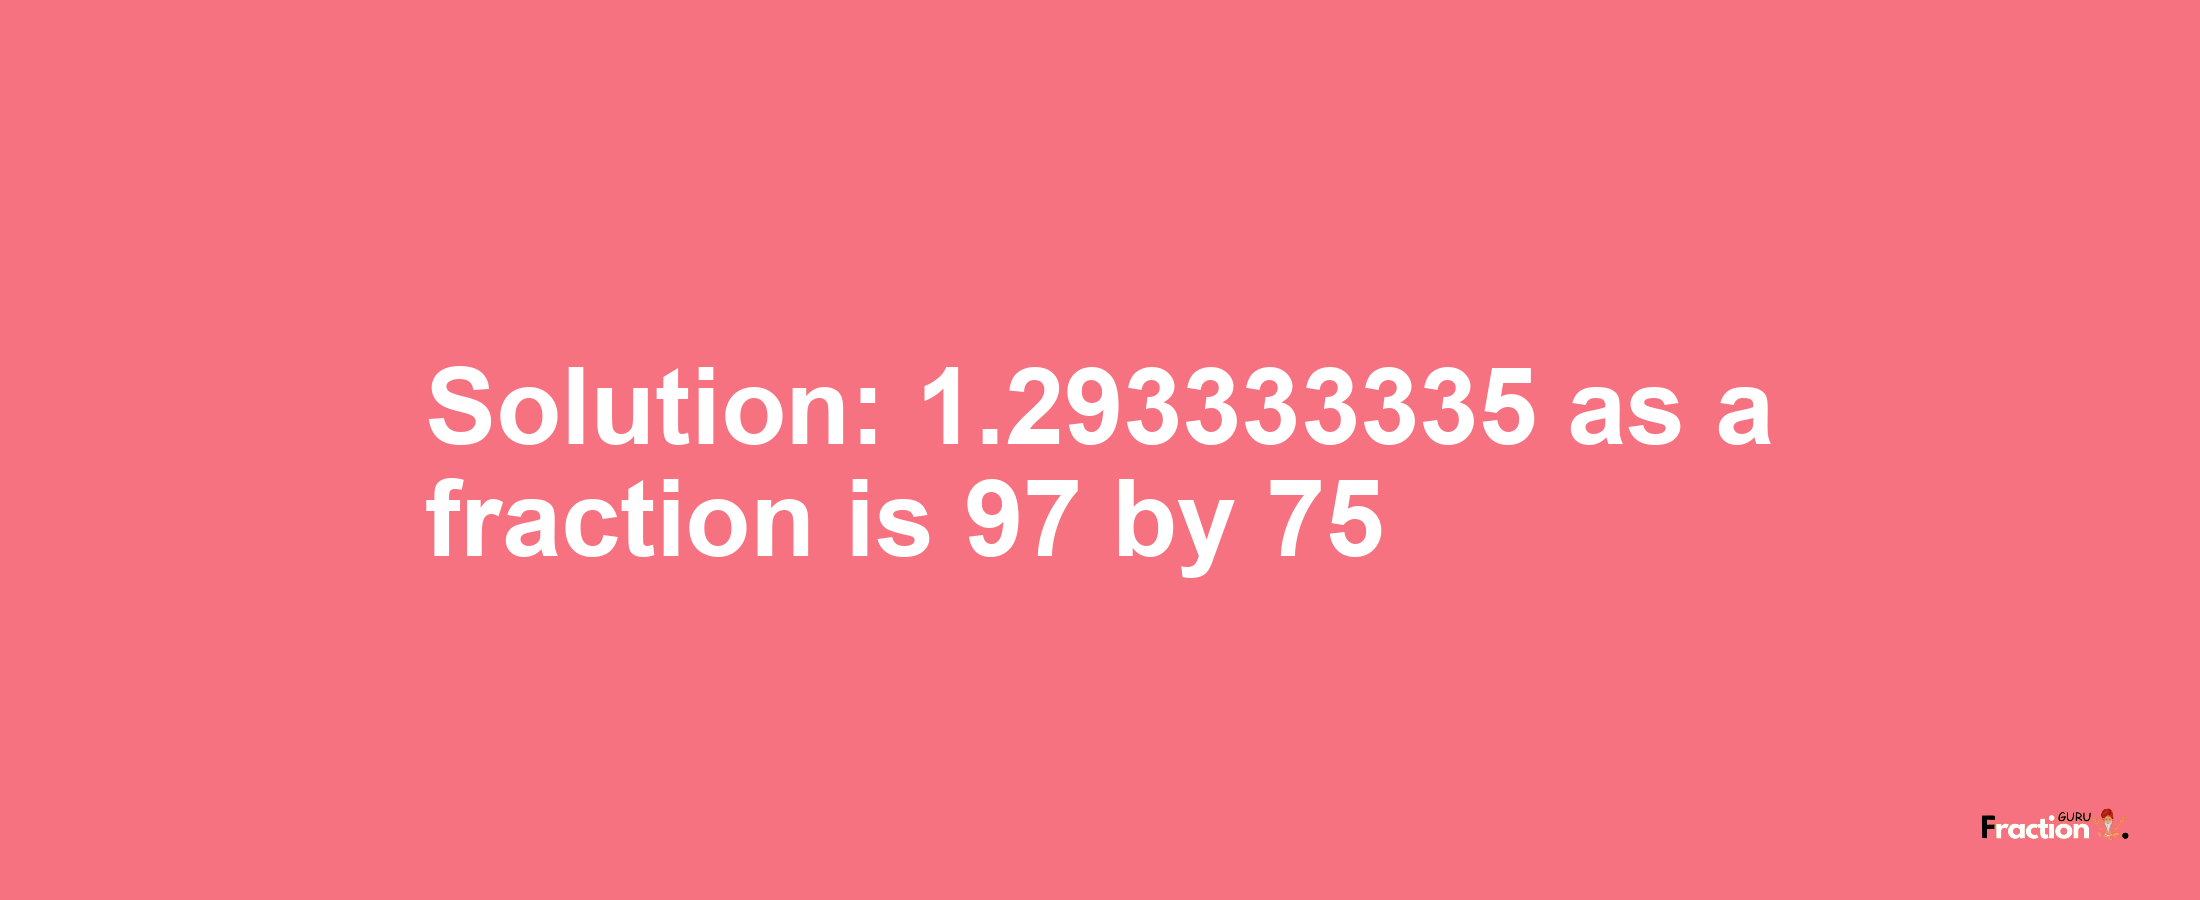 Solution:1.293333335 as a fraction is 97/75